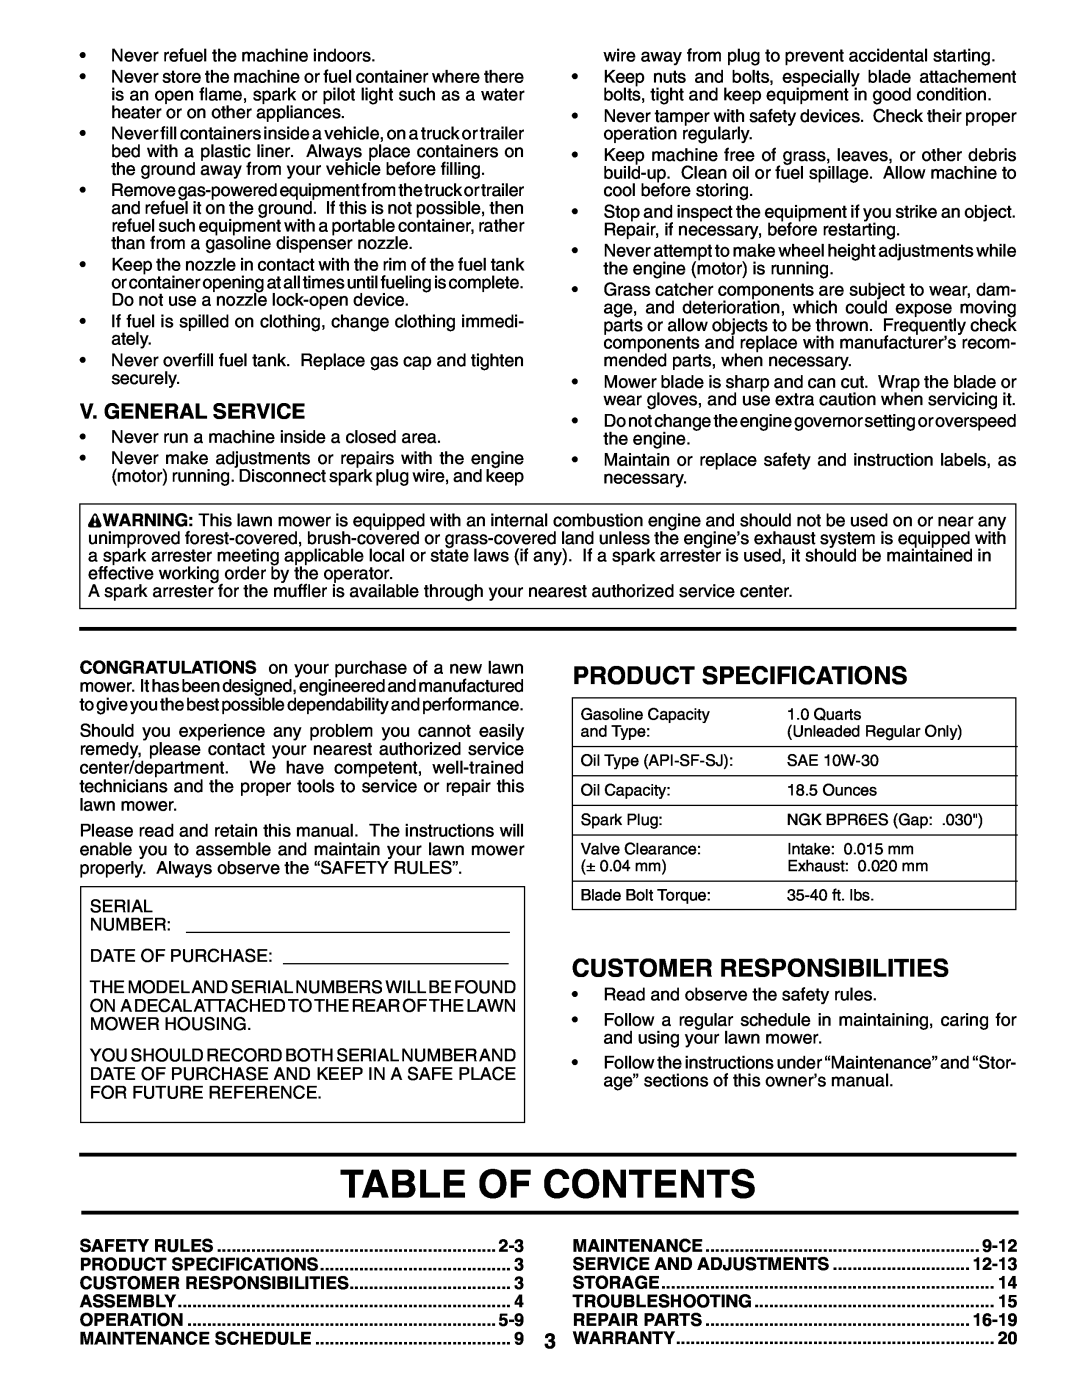 Husqvarna 5521 CHV 96143000106 Table Of Contents, Product Specifications, Customer Responsibilities, V. General Service 